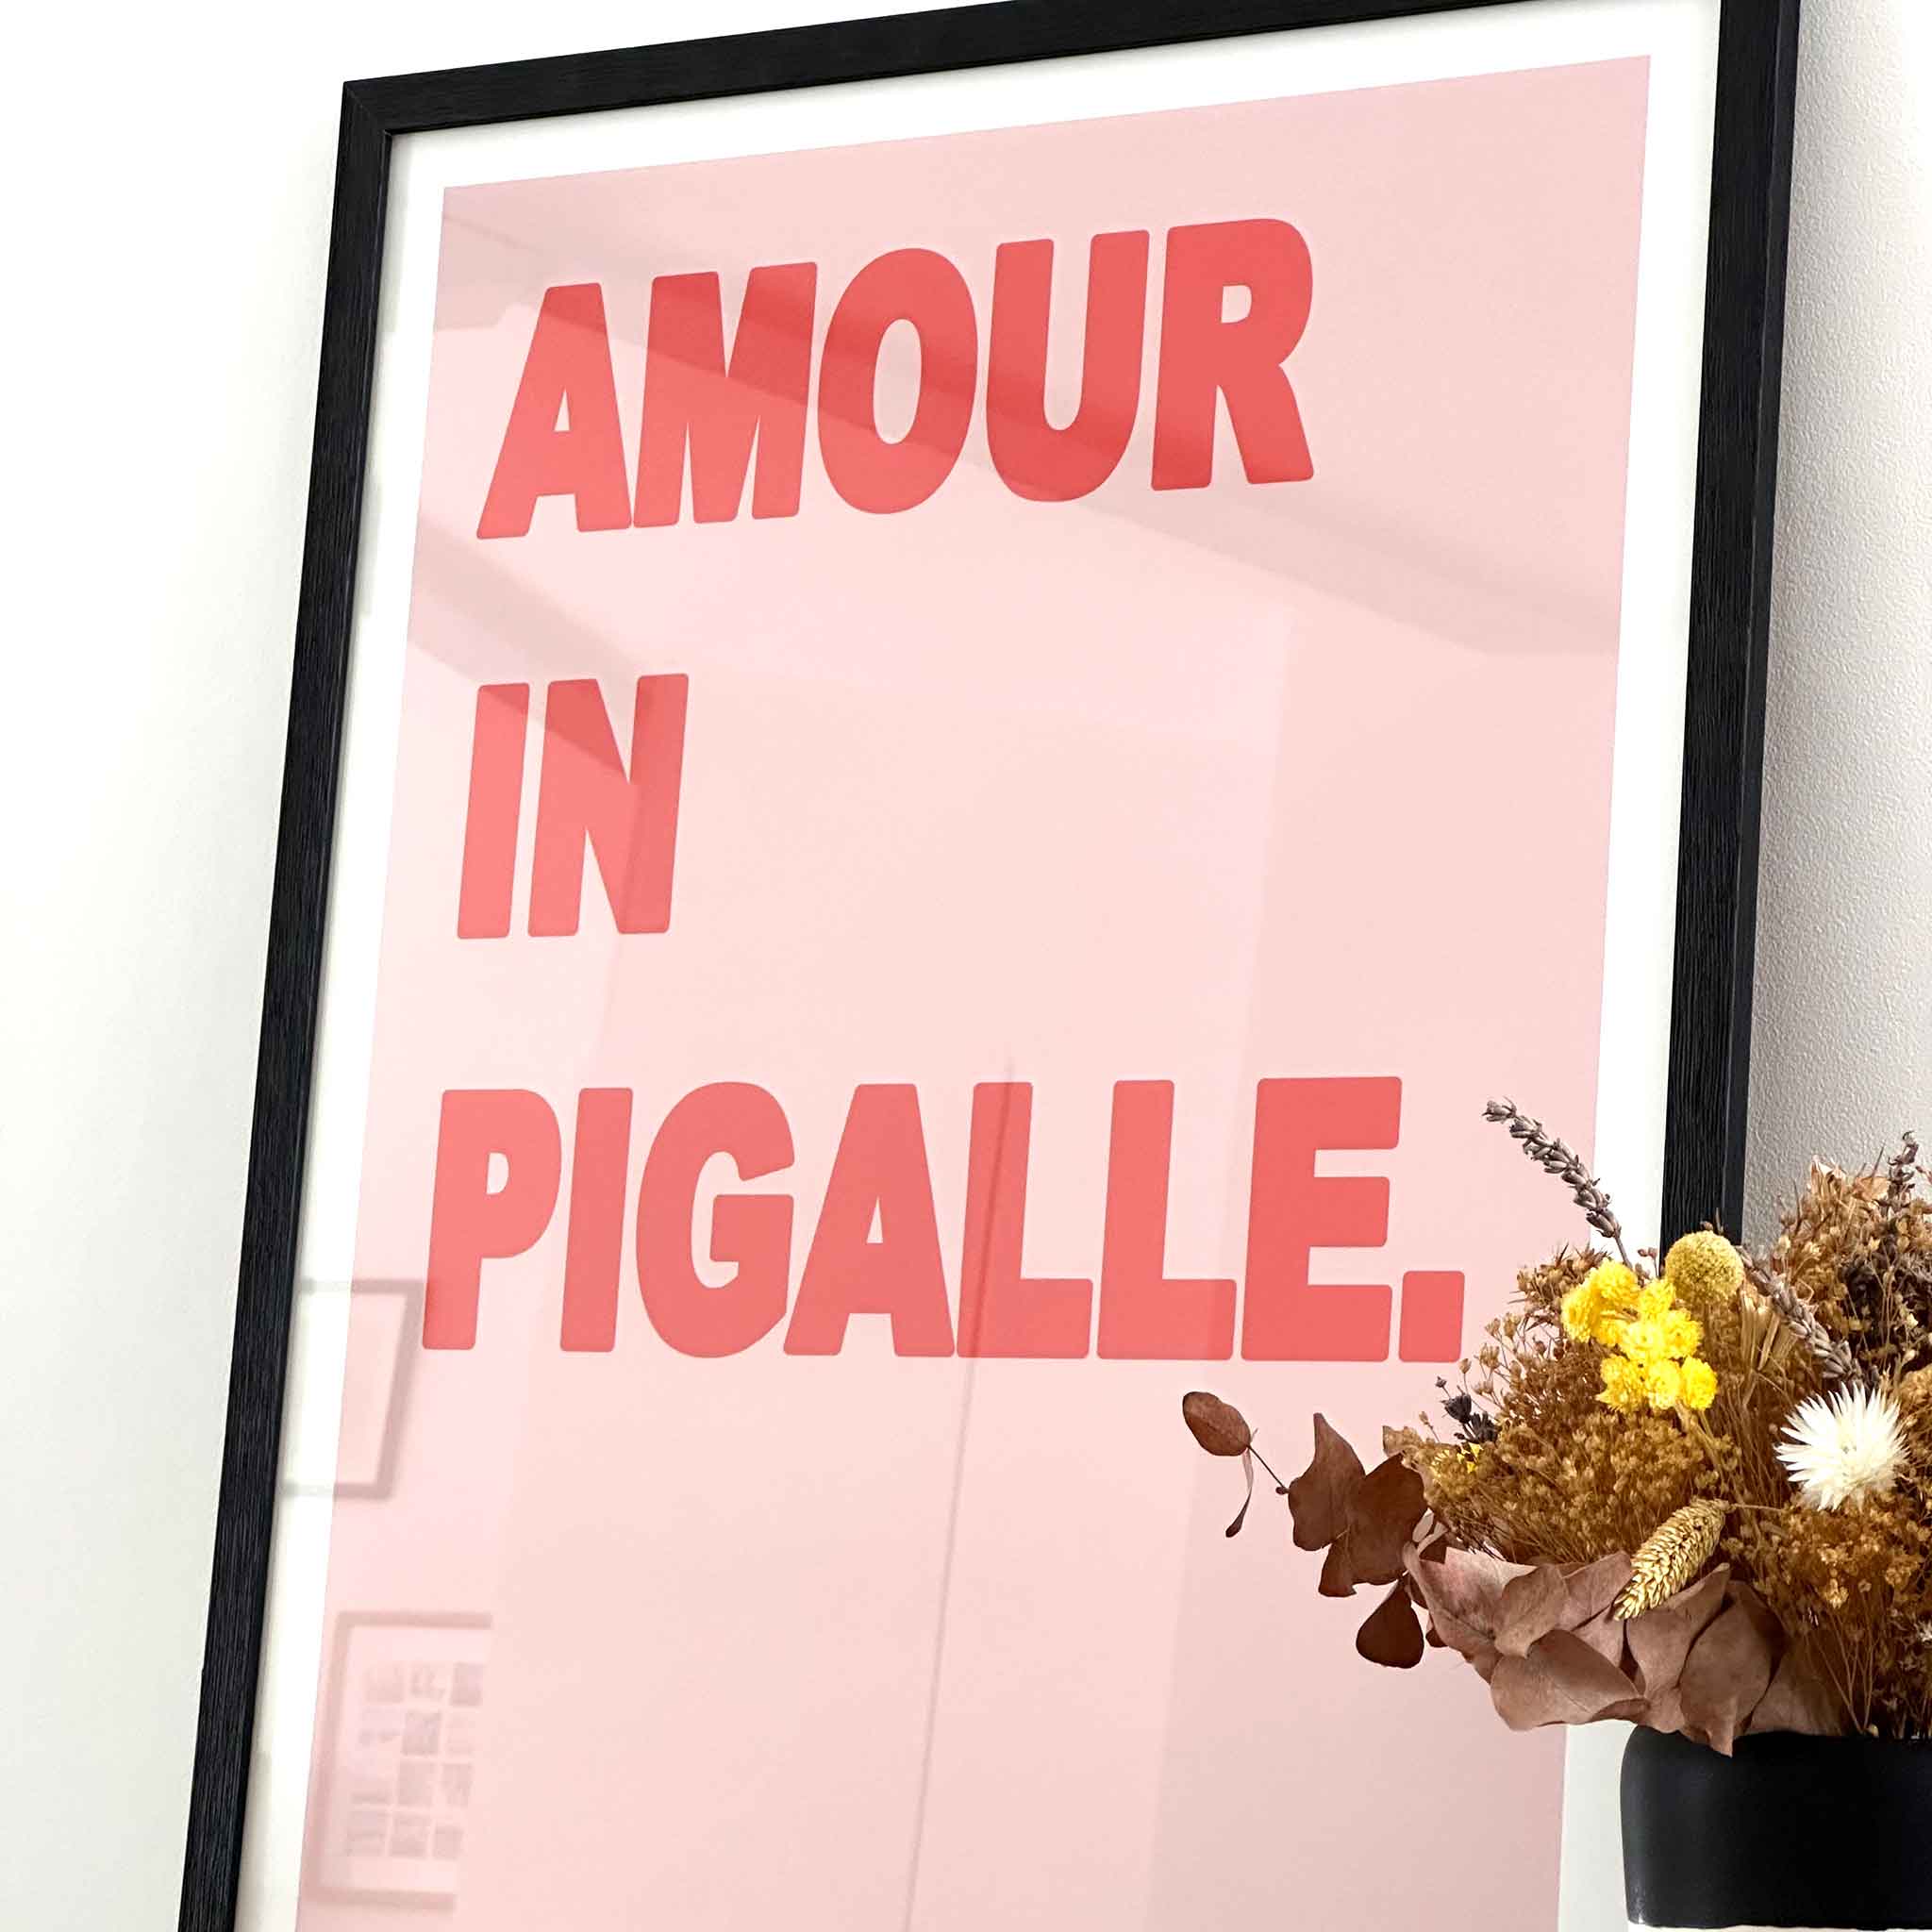 Affiche AMOUR IN PIGALLE